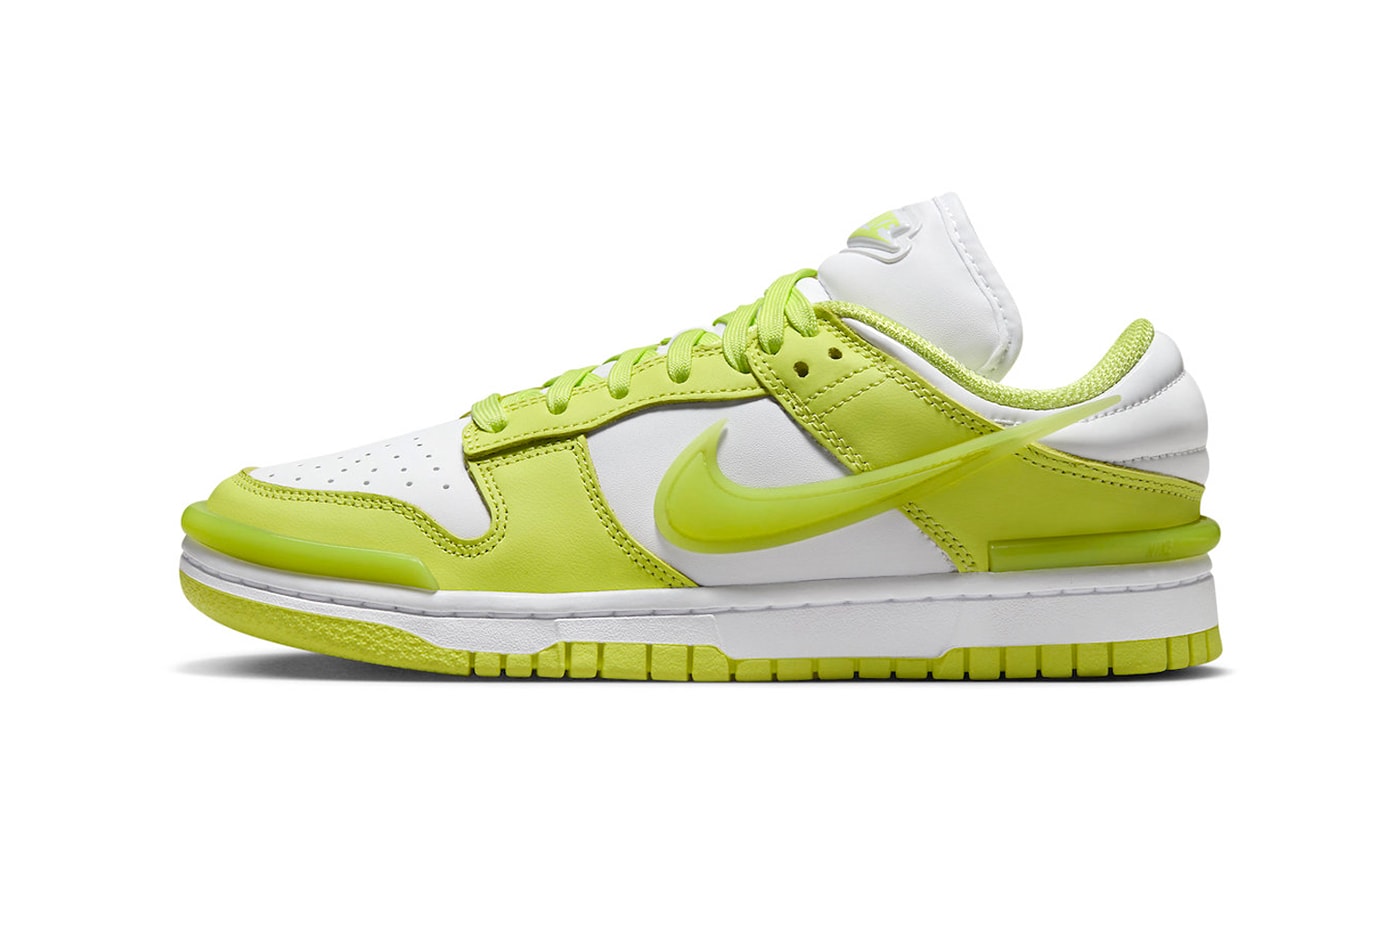 Official Images of the Nike Dunk Low Twist "Lemon Twist" DZ2794-700 holiday 2023 Light Lemon Twist/Light Lemon Twist-White release info sneakers swoosh shoes